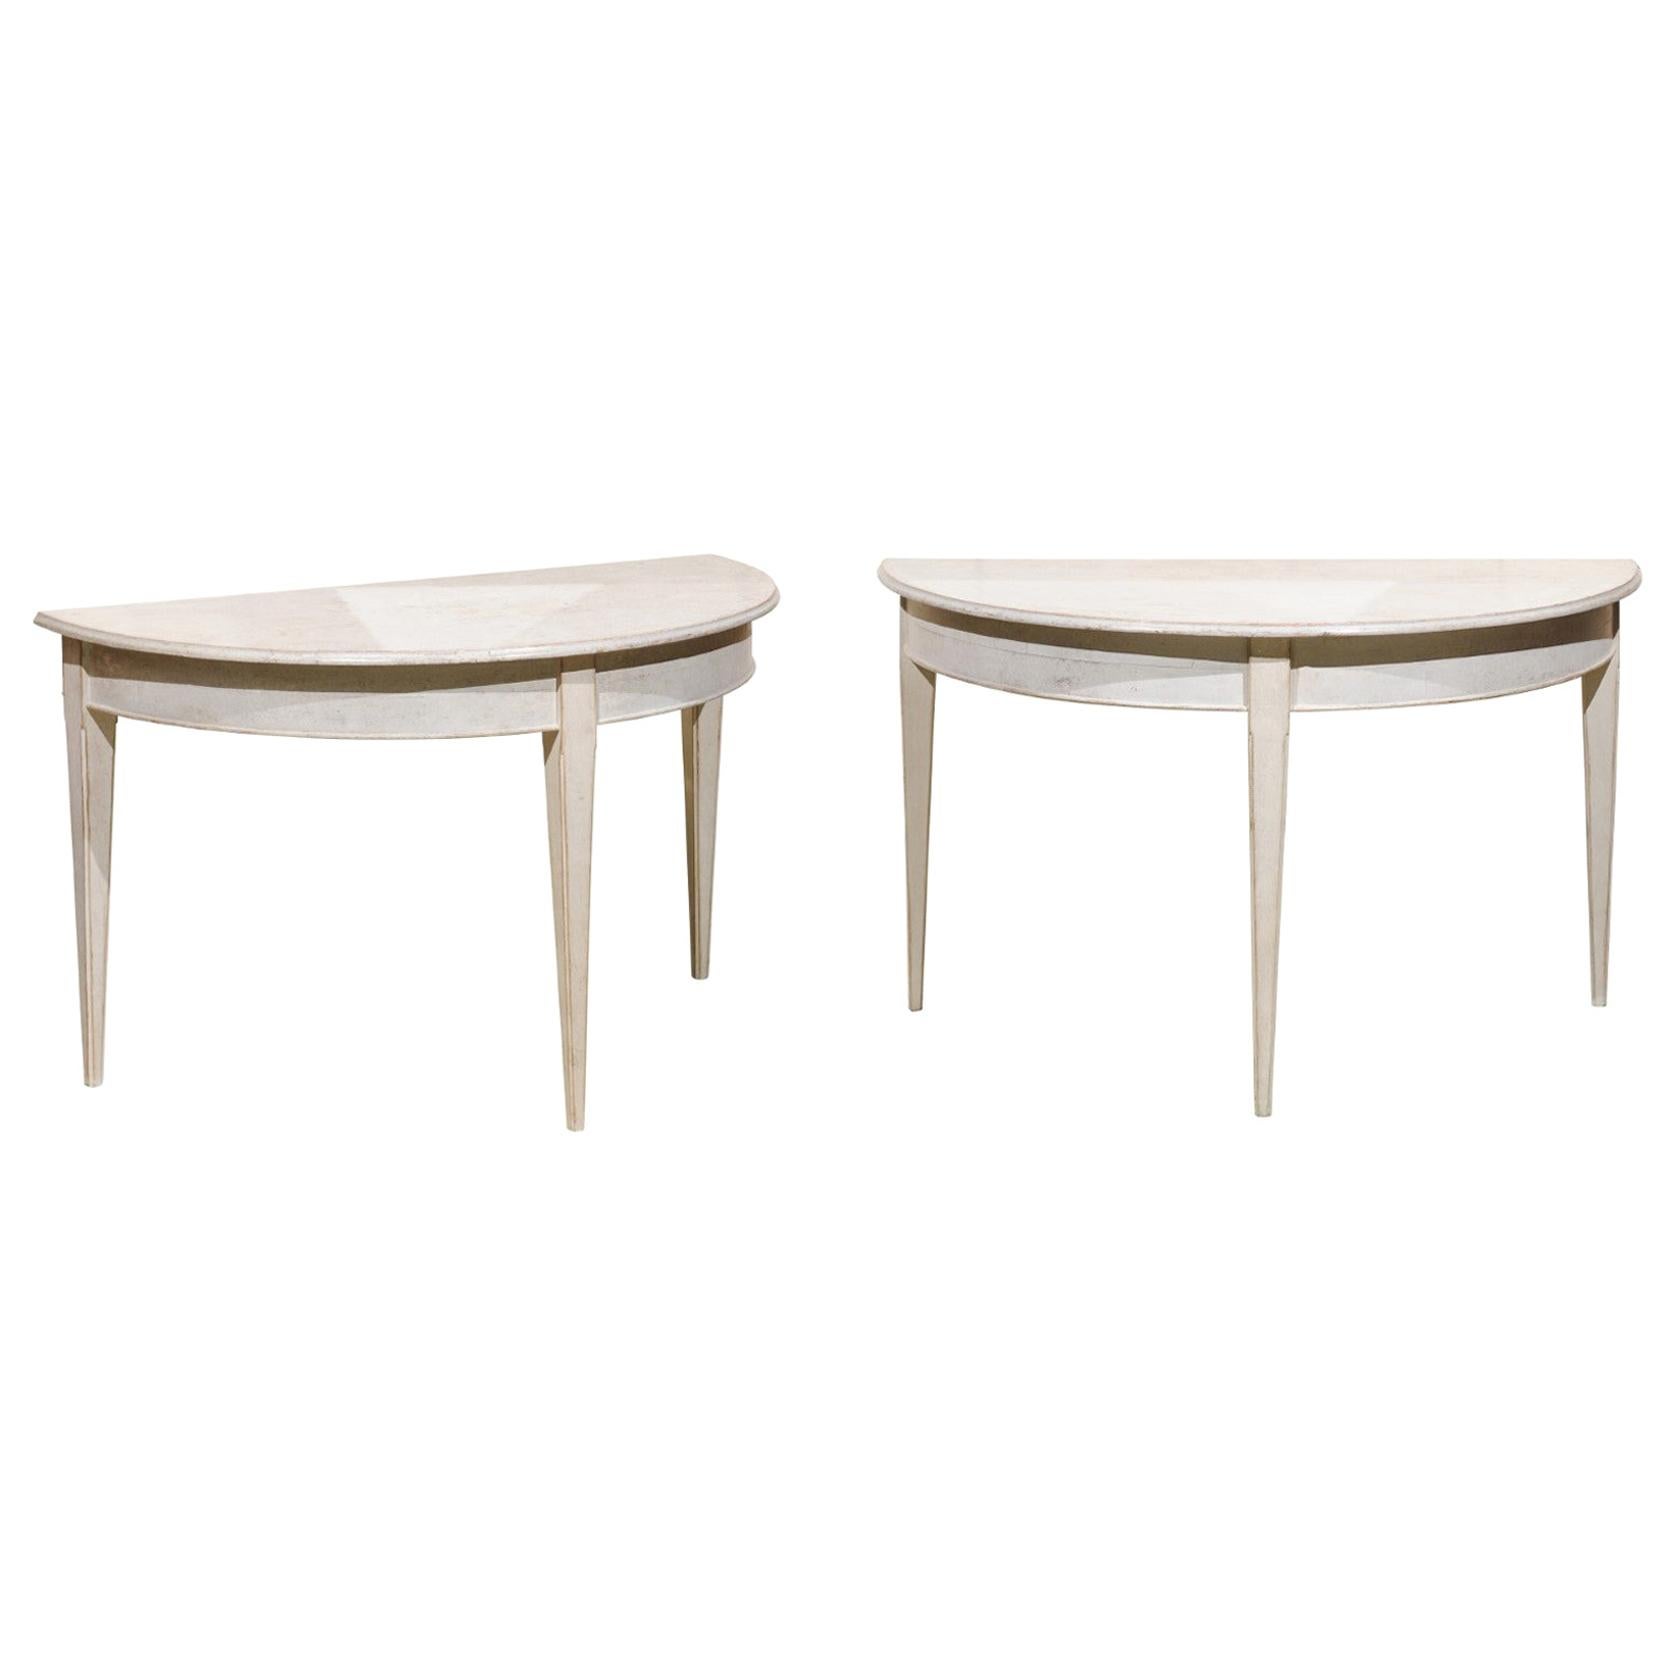 Pair of Painted Demilune Console Tables with Tapering Legs, Sweden